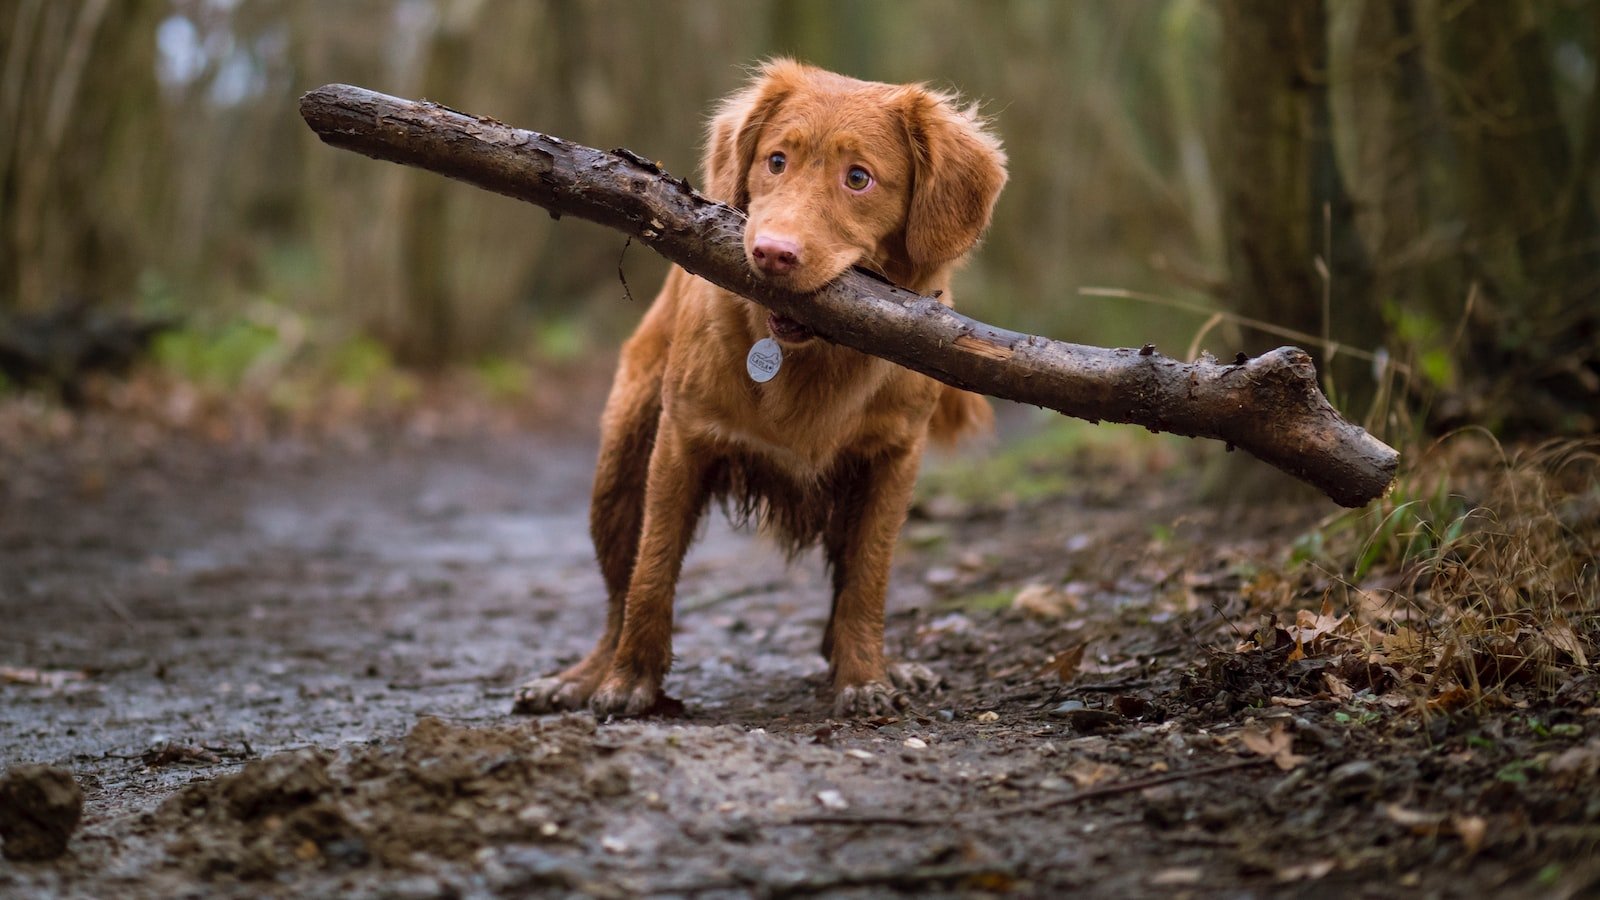 Developing a Strong Bond: Building Trust and Communication with Your Dog